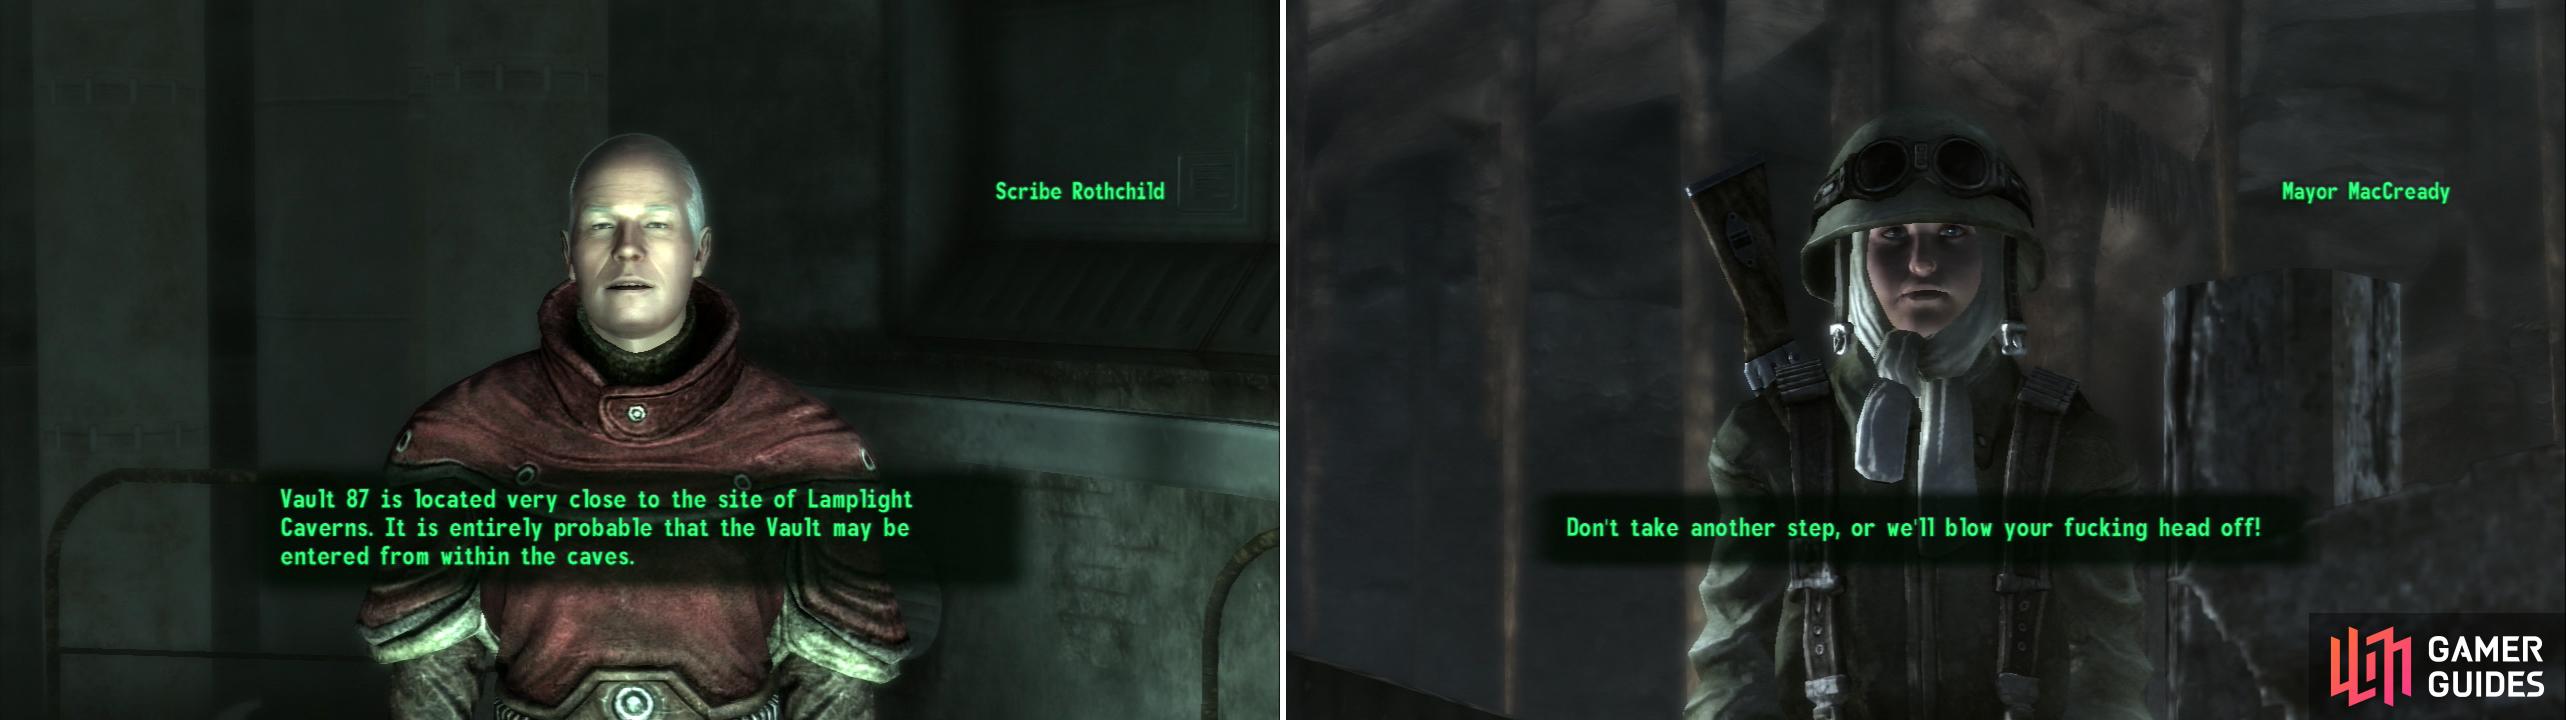 Scribe Rothchild will point you towards the Lamplight Caverns, through which we might reach Vault 87 (left). but Little Lamplight isn't unnoccupied-you'll have to deal with Mayor MacCready to gain access (right).